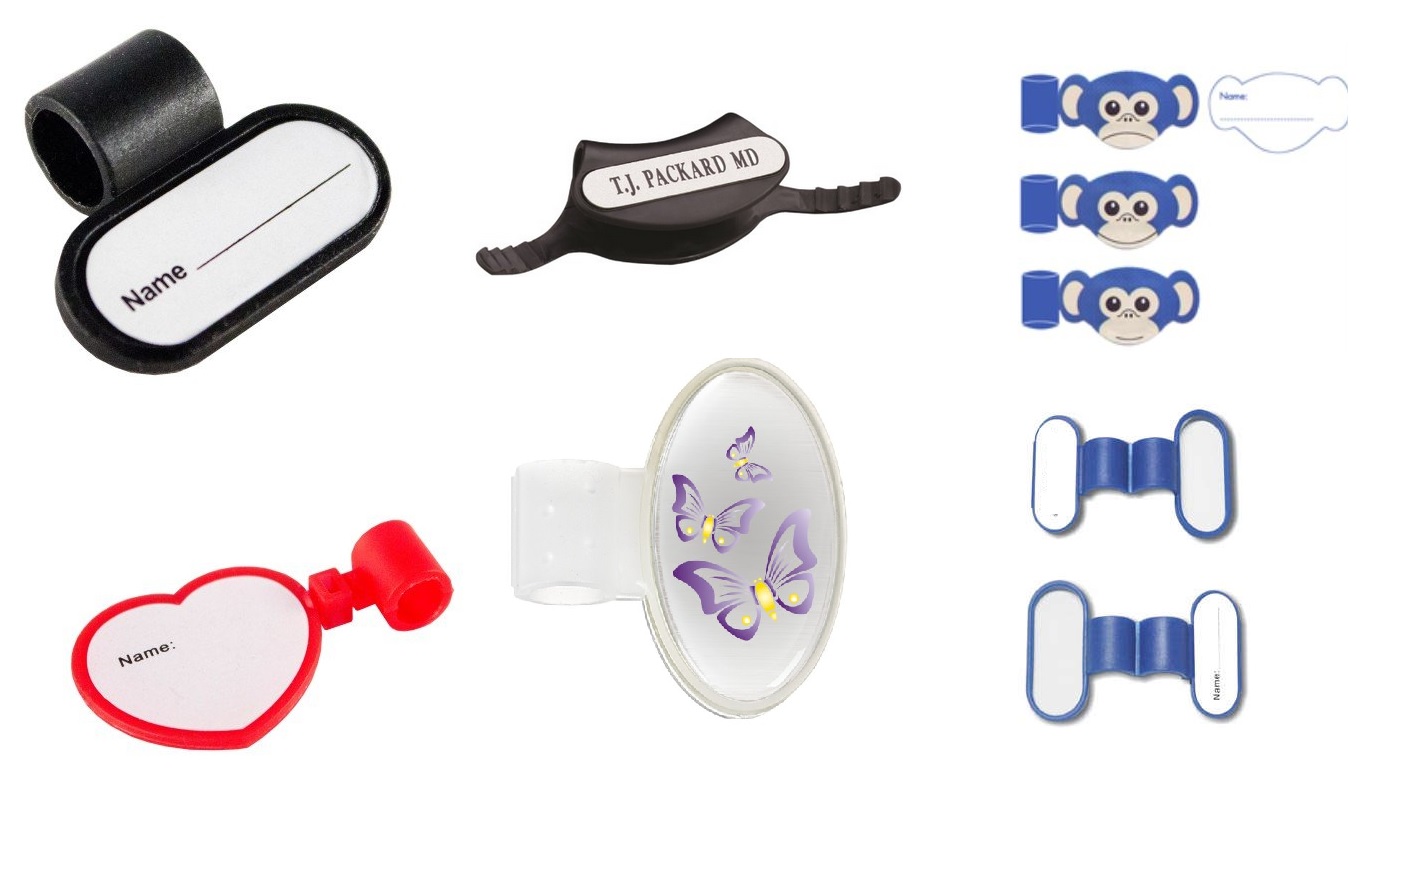 Stethoscope Cover for Professional Stethosocpe